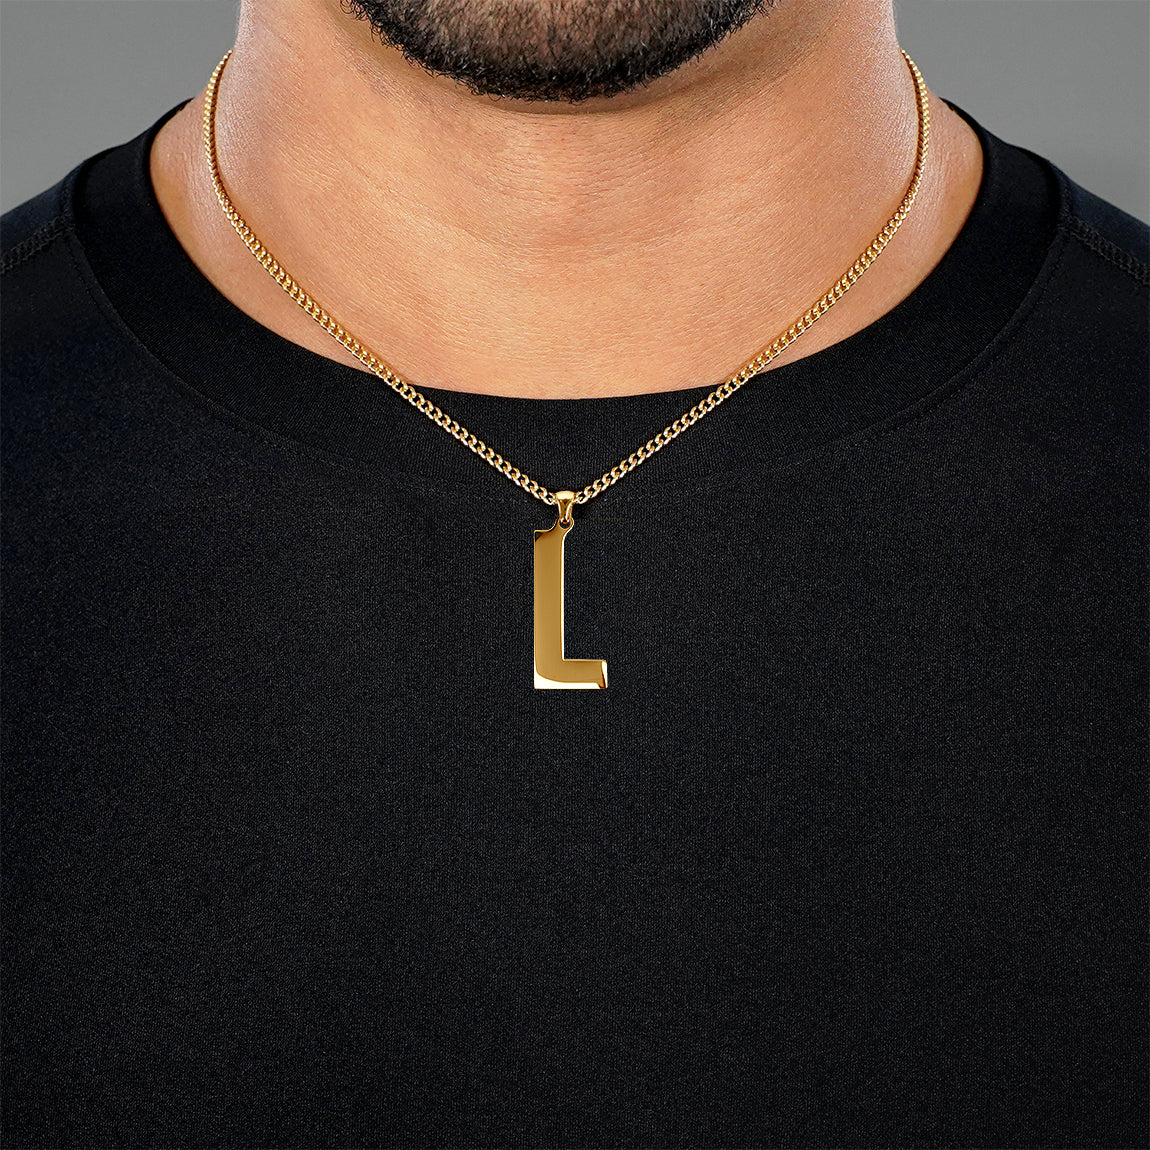 L Letter Pendant with Chain Necklace - Gold Plated Stainless Steel